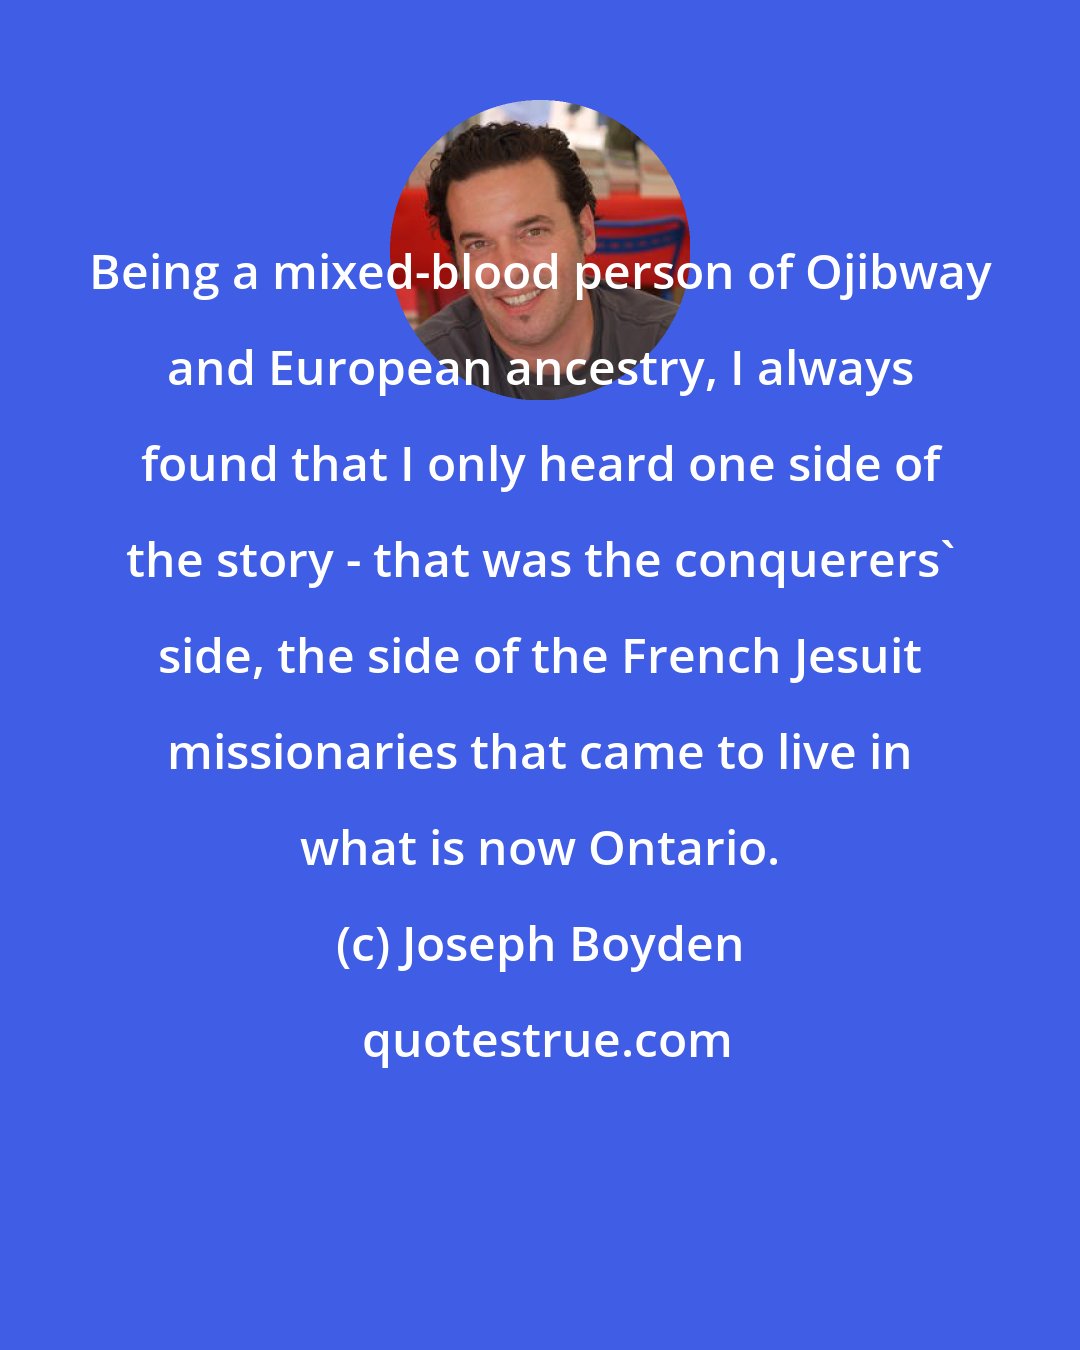 Joseph Boyden: Being a mixed-blood person of Ojibway and European ancestry, I always found that I only heard one side of the story - that was the conquerers' side, the side of the French Jesuit missionaries that came to live in what is now Ontario.